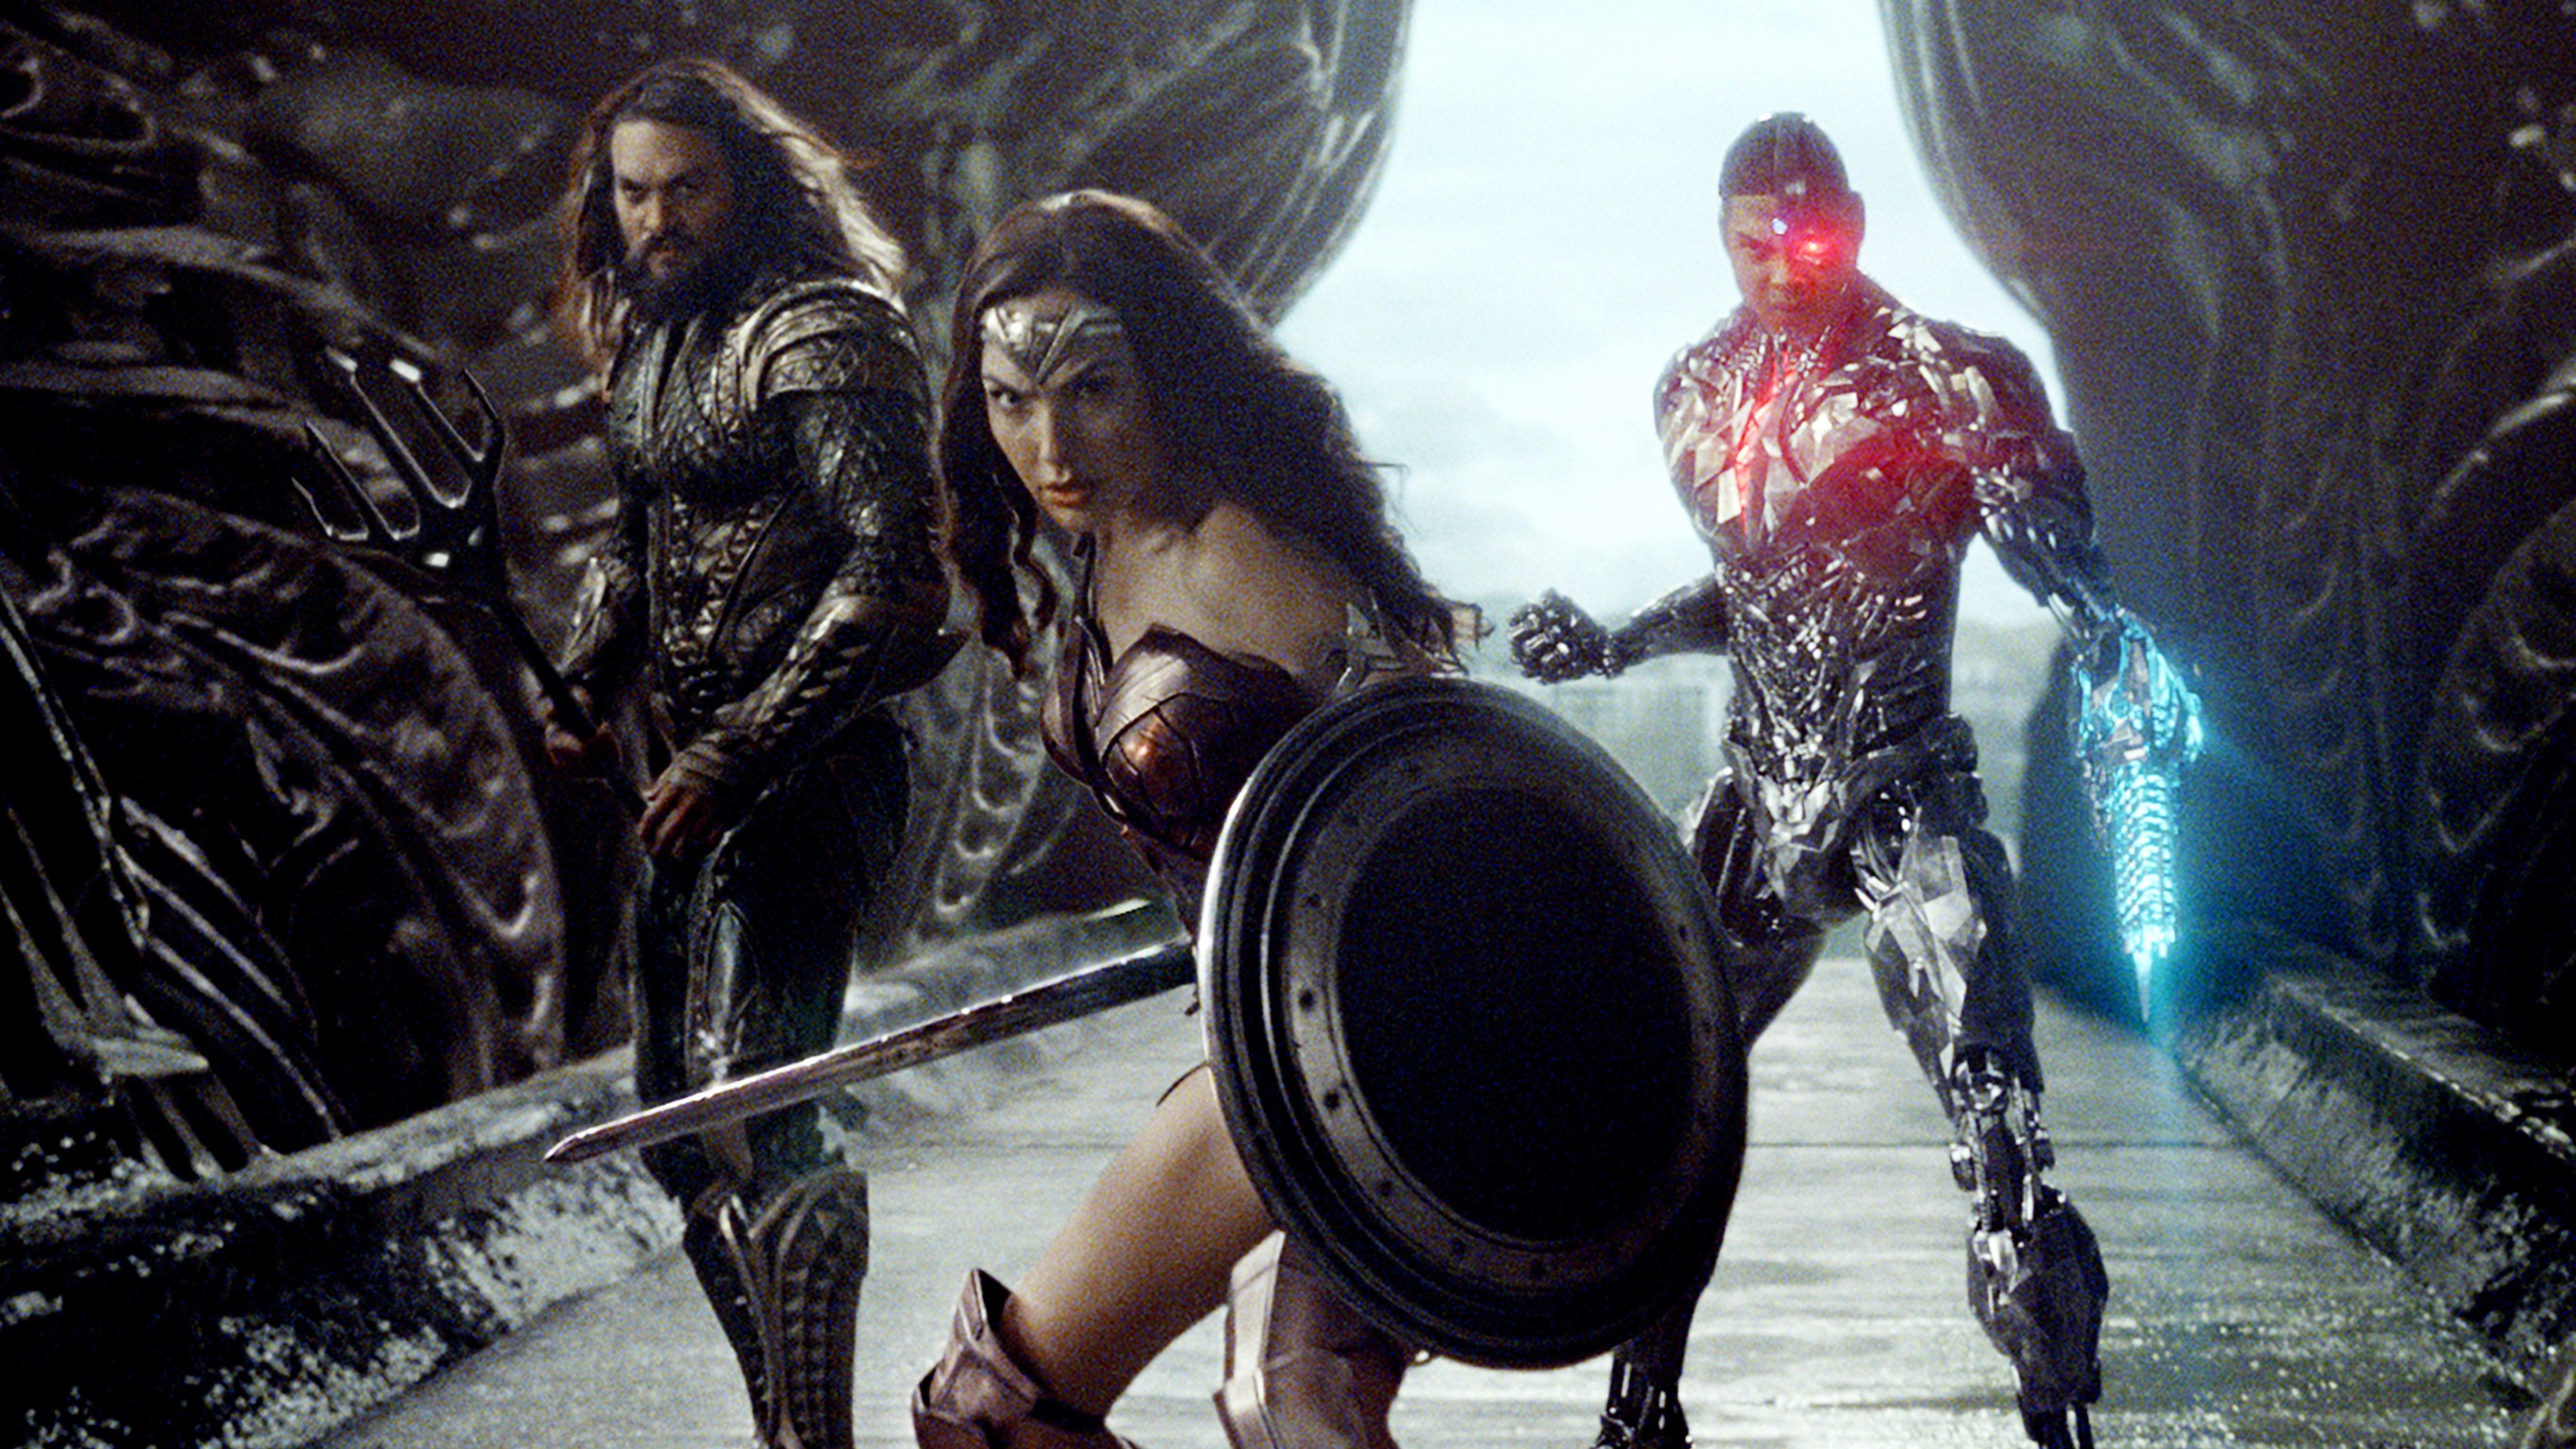 Aquaman, Wonder Woman, and Cyborg in Justice League